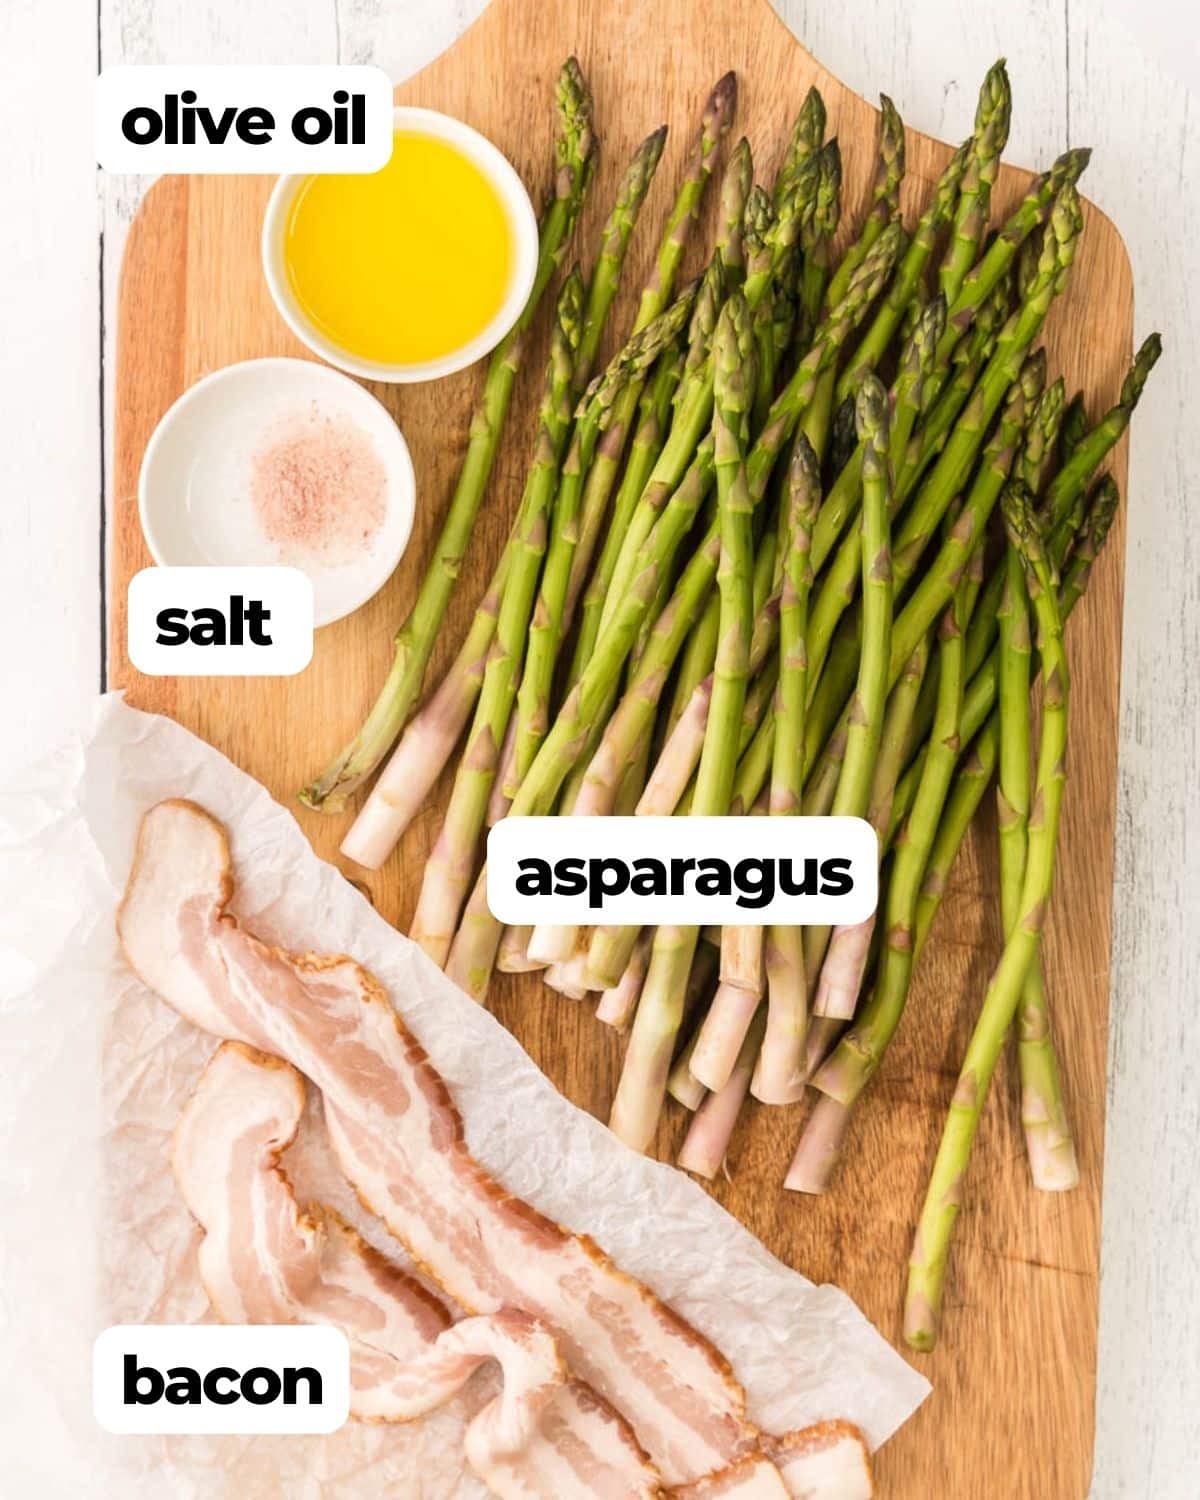 Air fryer bacon wrapped asparagus ingredients labeled